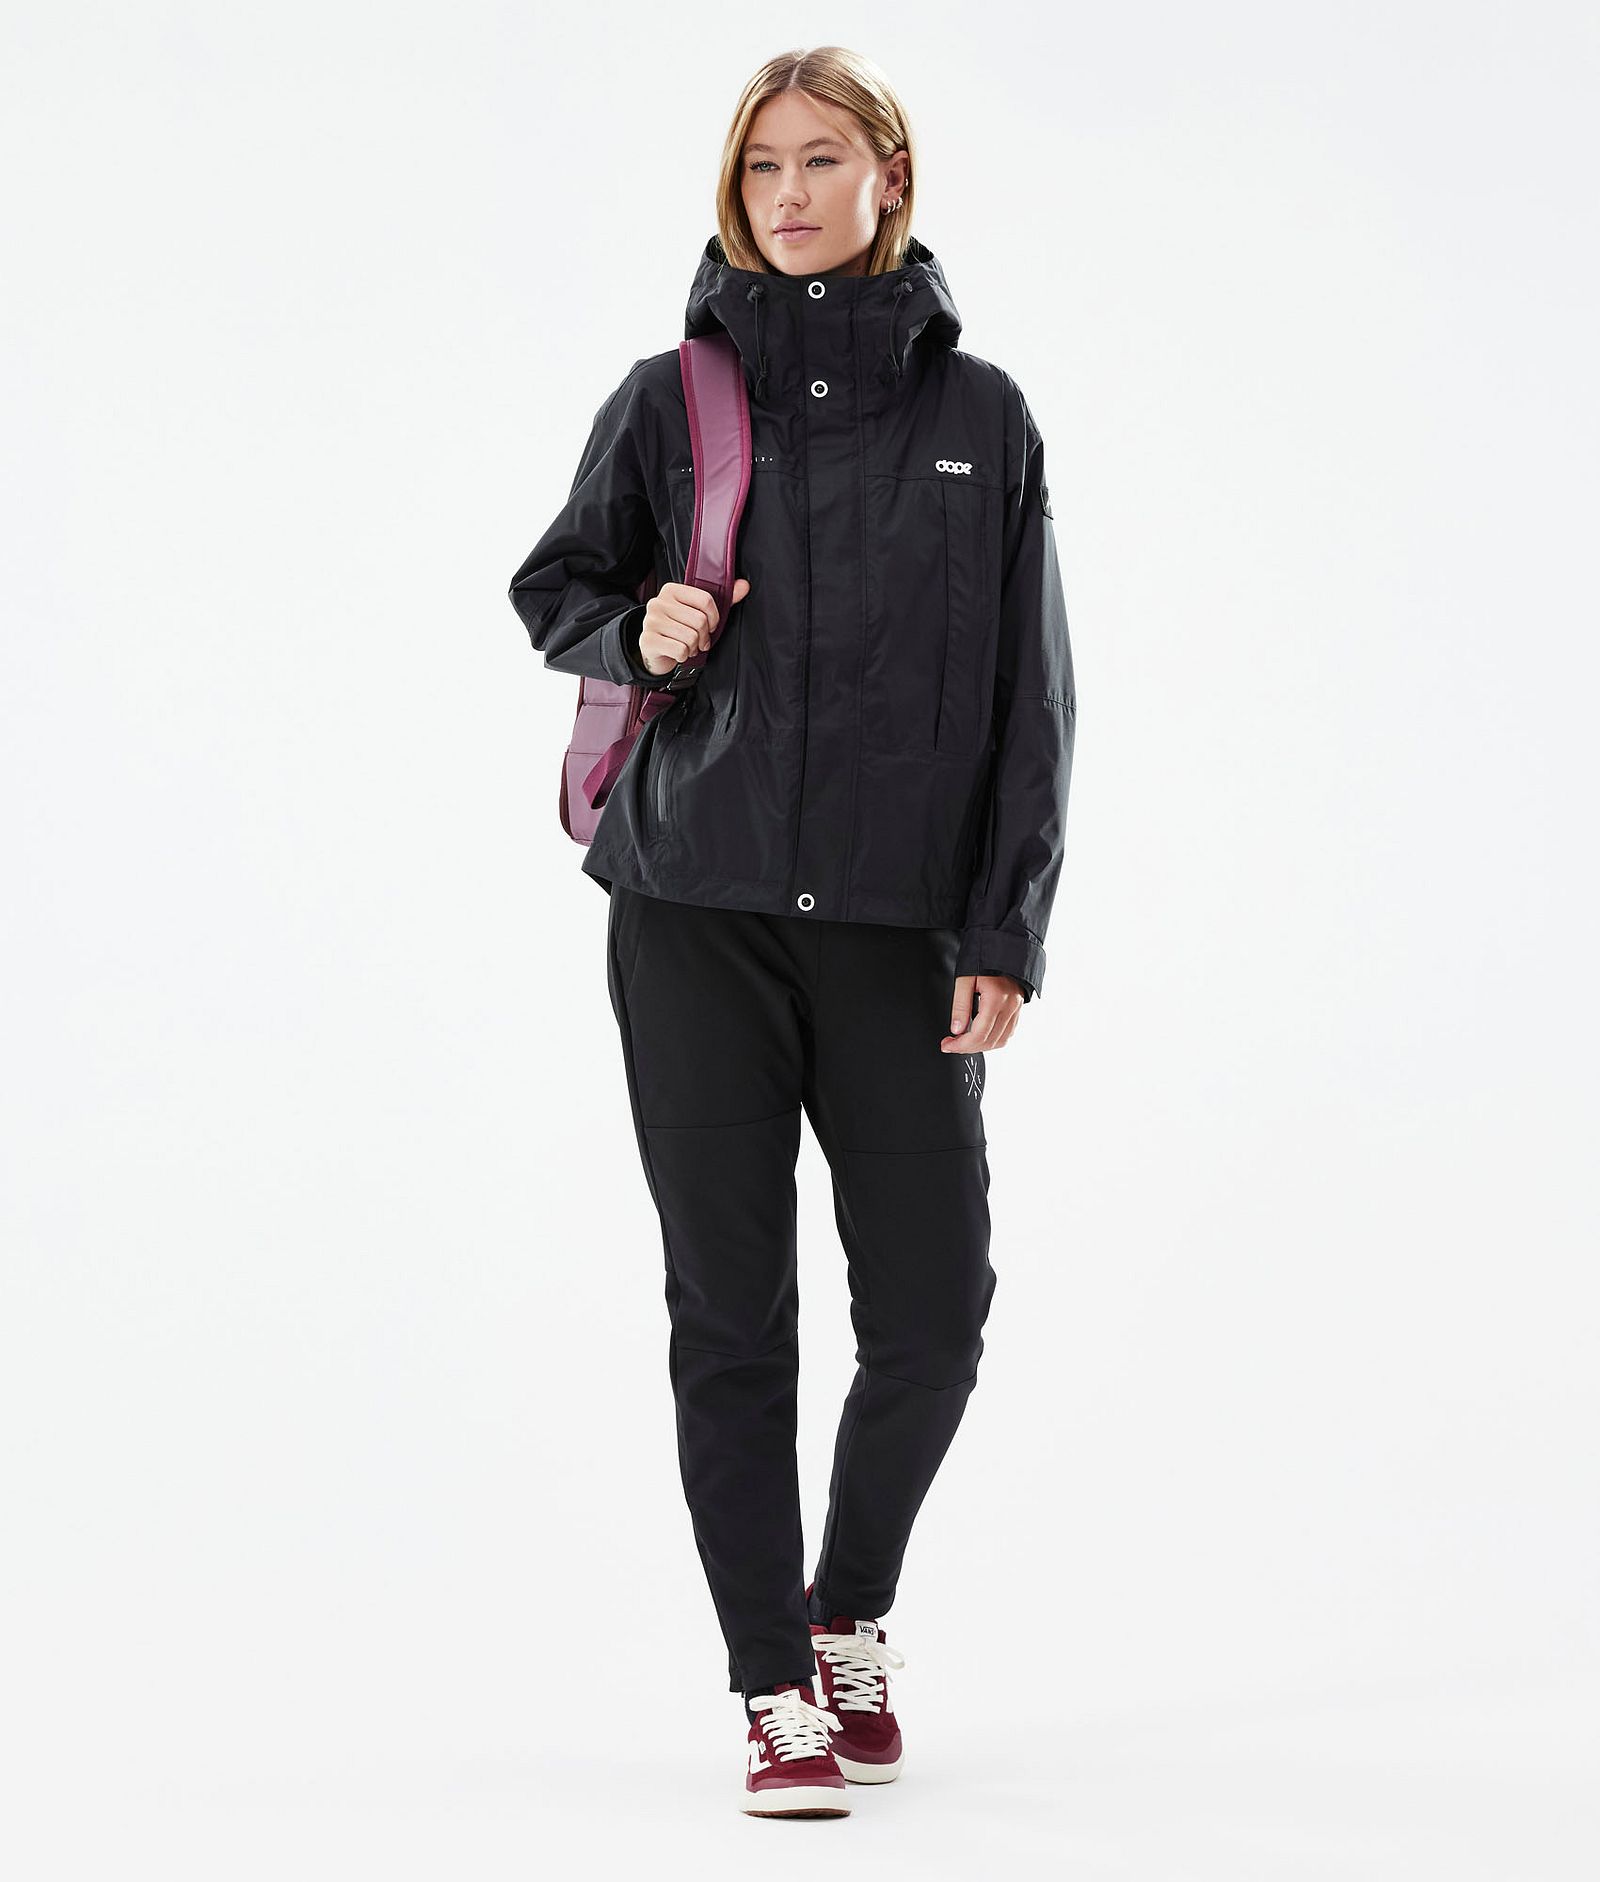 Dope Ranger Light W Outfit de Outdoor Mujer Black